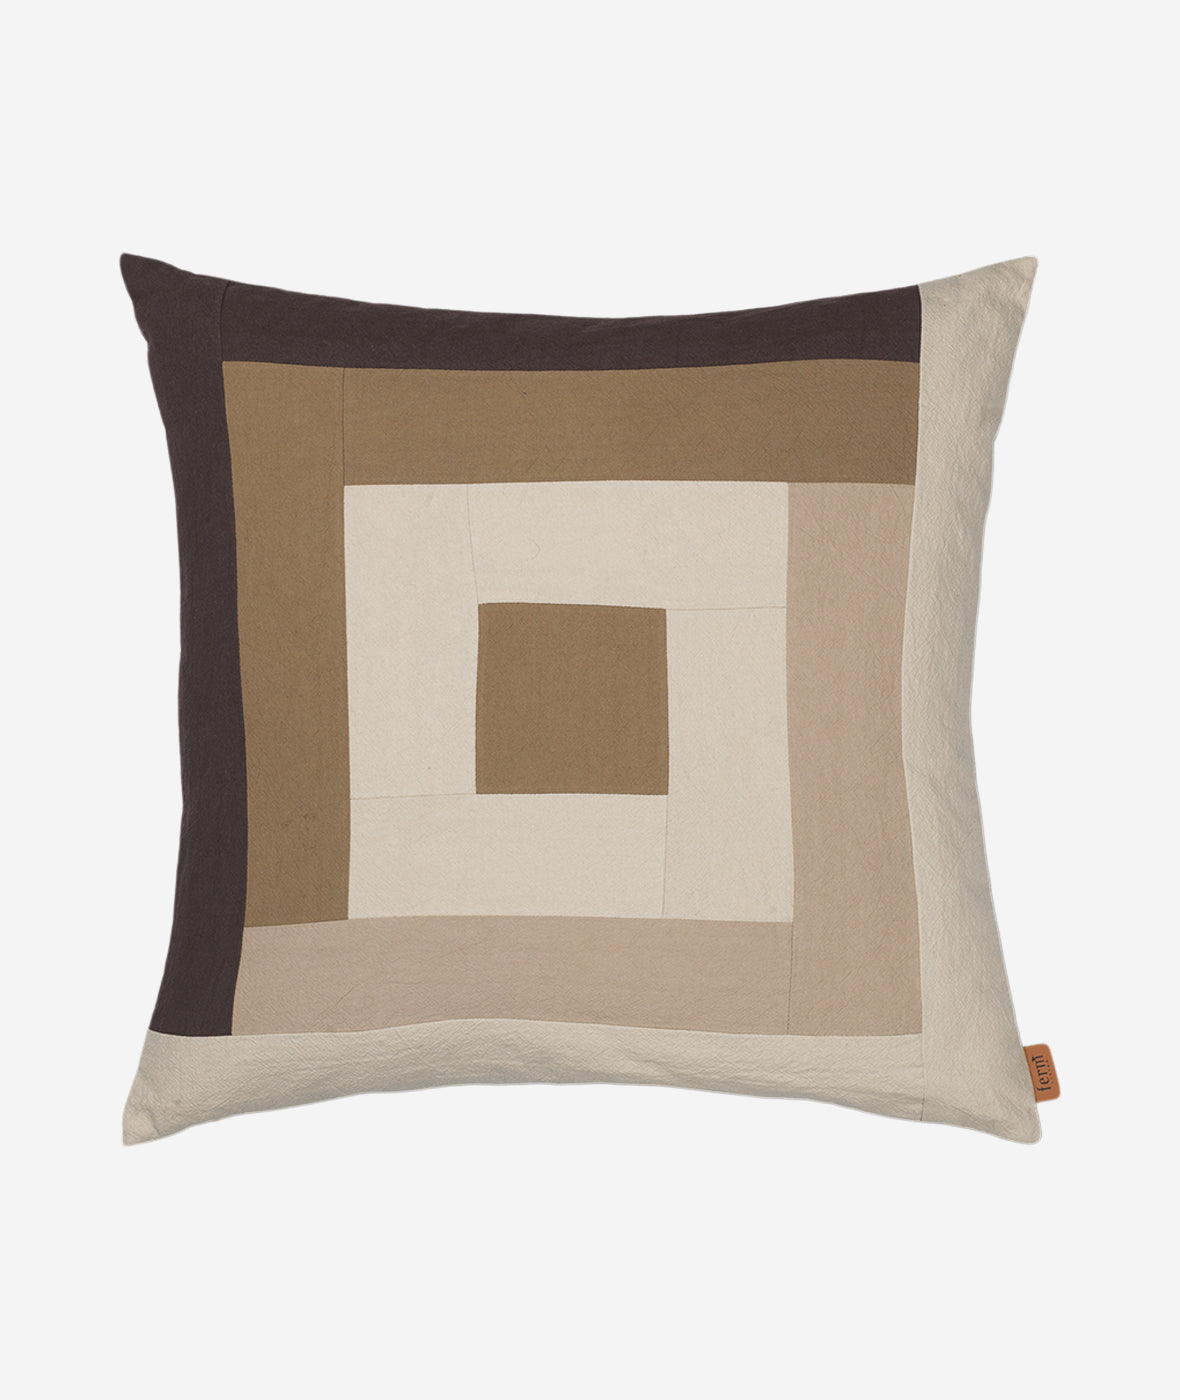 Border Patchwork Pillow - More Options